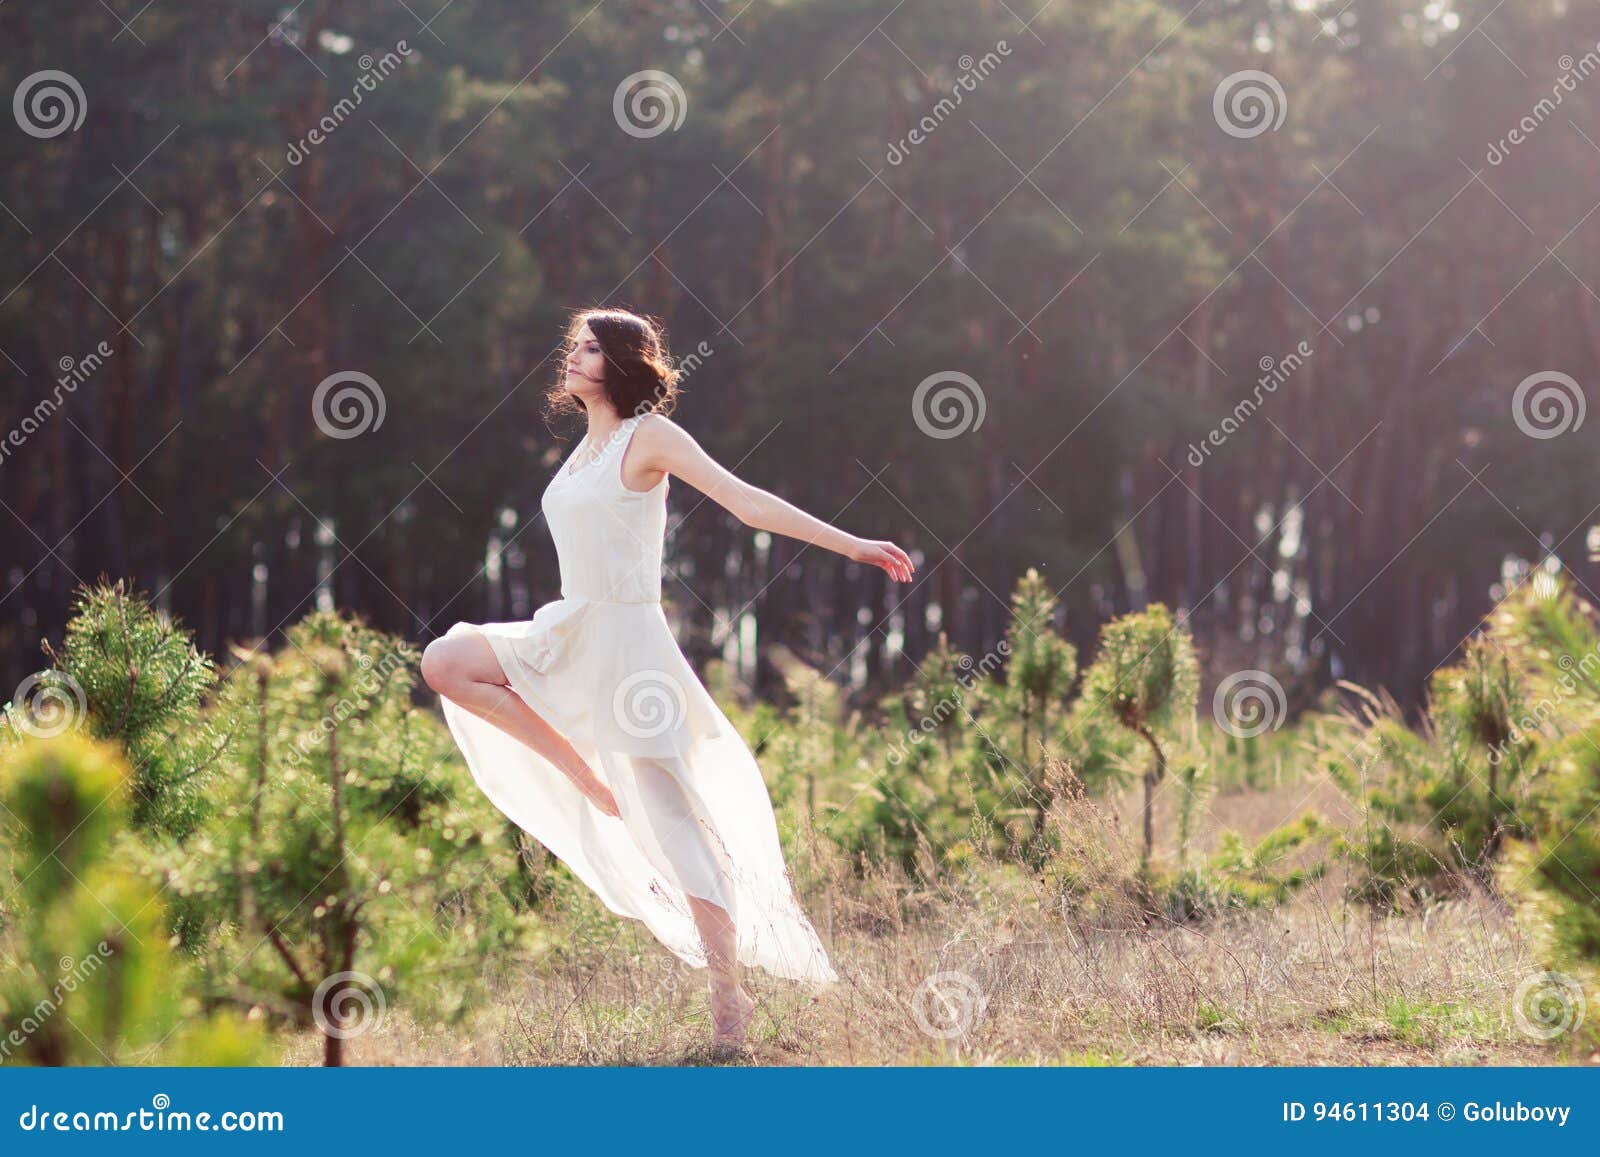 Contemporary Dances in Nature Stock Photo - Image of hair, dancer: